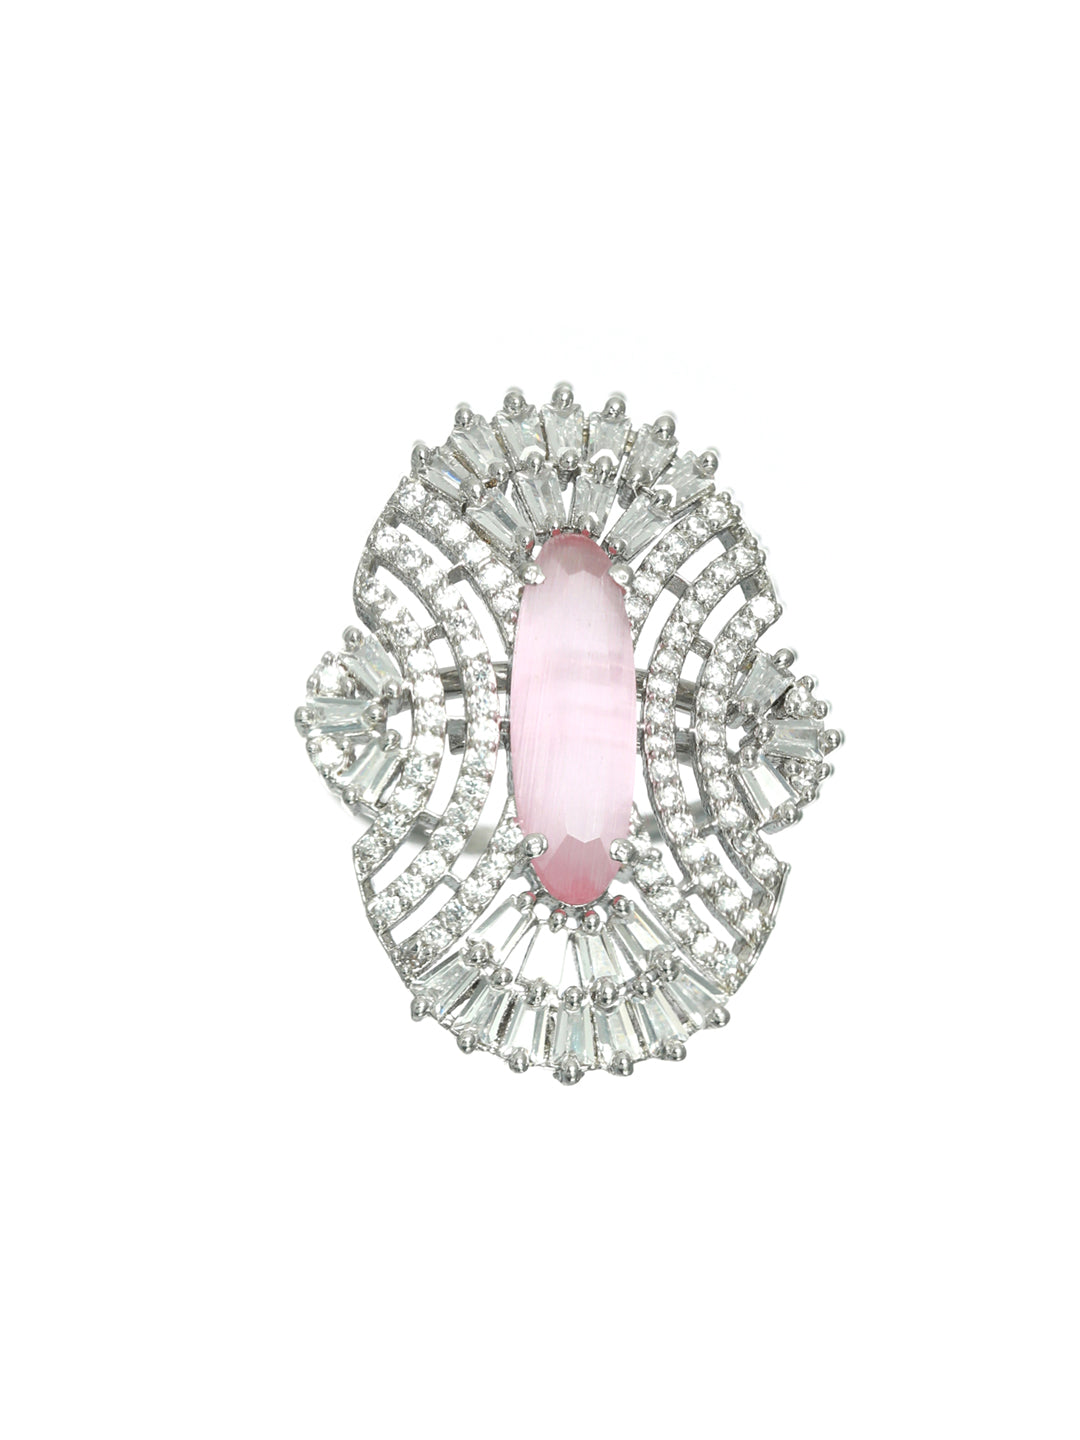 Pink American Diamond studded,Silver-Plated CZ Studded Adjustable Finger Ring - Jazzandsizzle